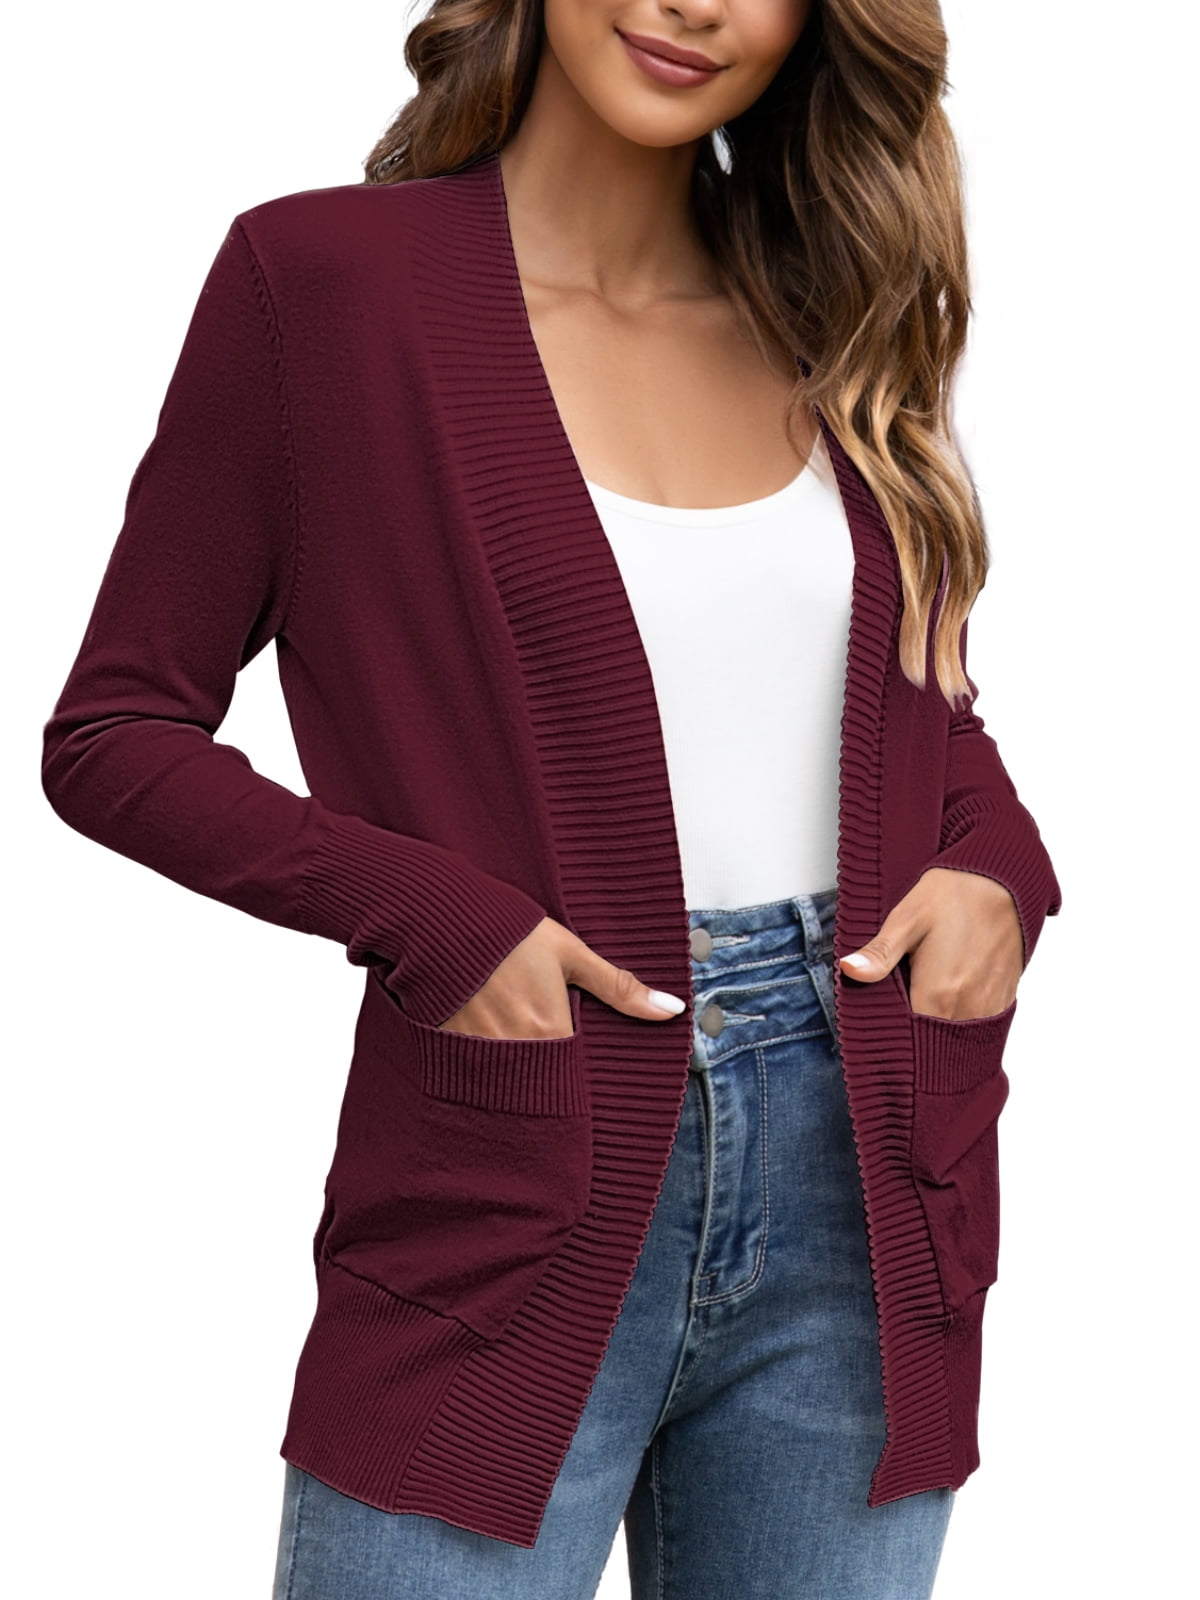 AUSELILY Women's Cardigan Sweaters for Women with Pocketes Long Sleeve Casual Lightweight Open Front Cardigan 